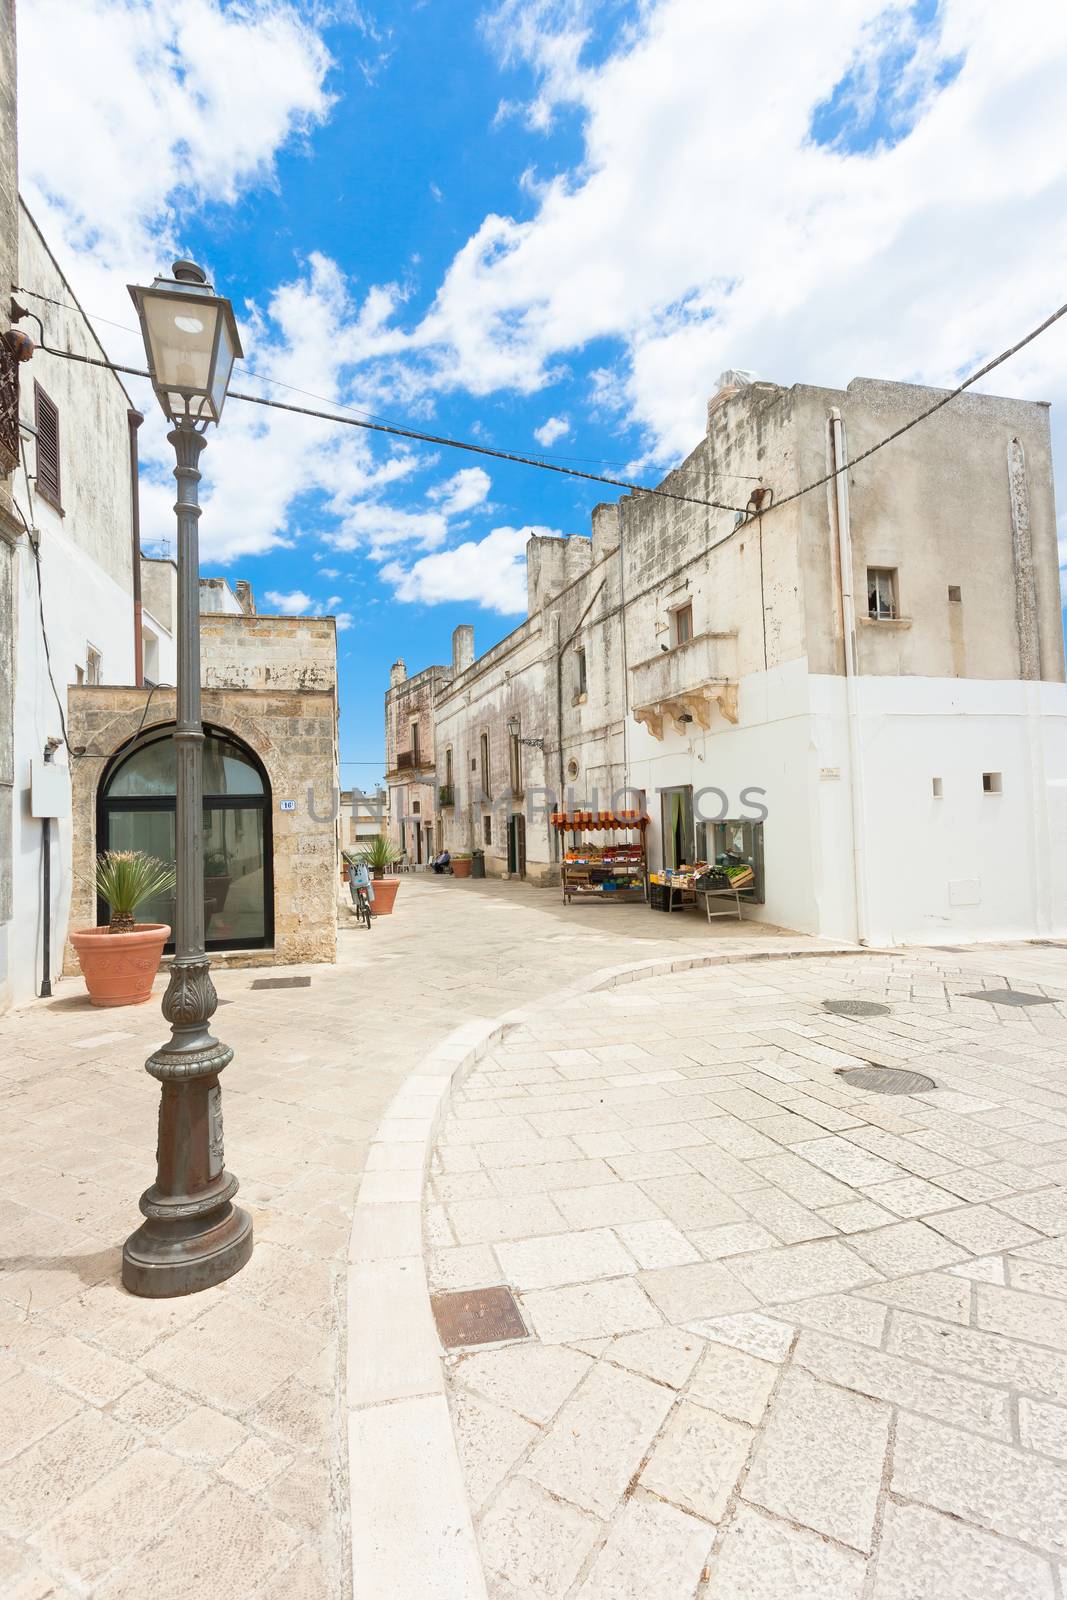 Specchia, Apulia - Historic crossroads in the old town of Soecch by tagstiles.com